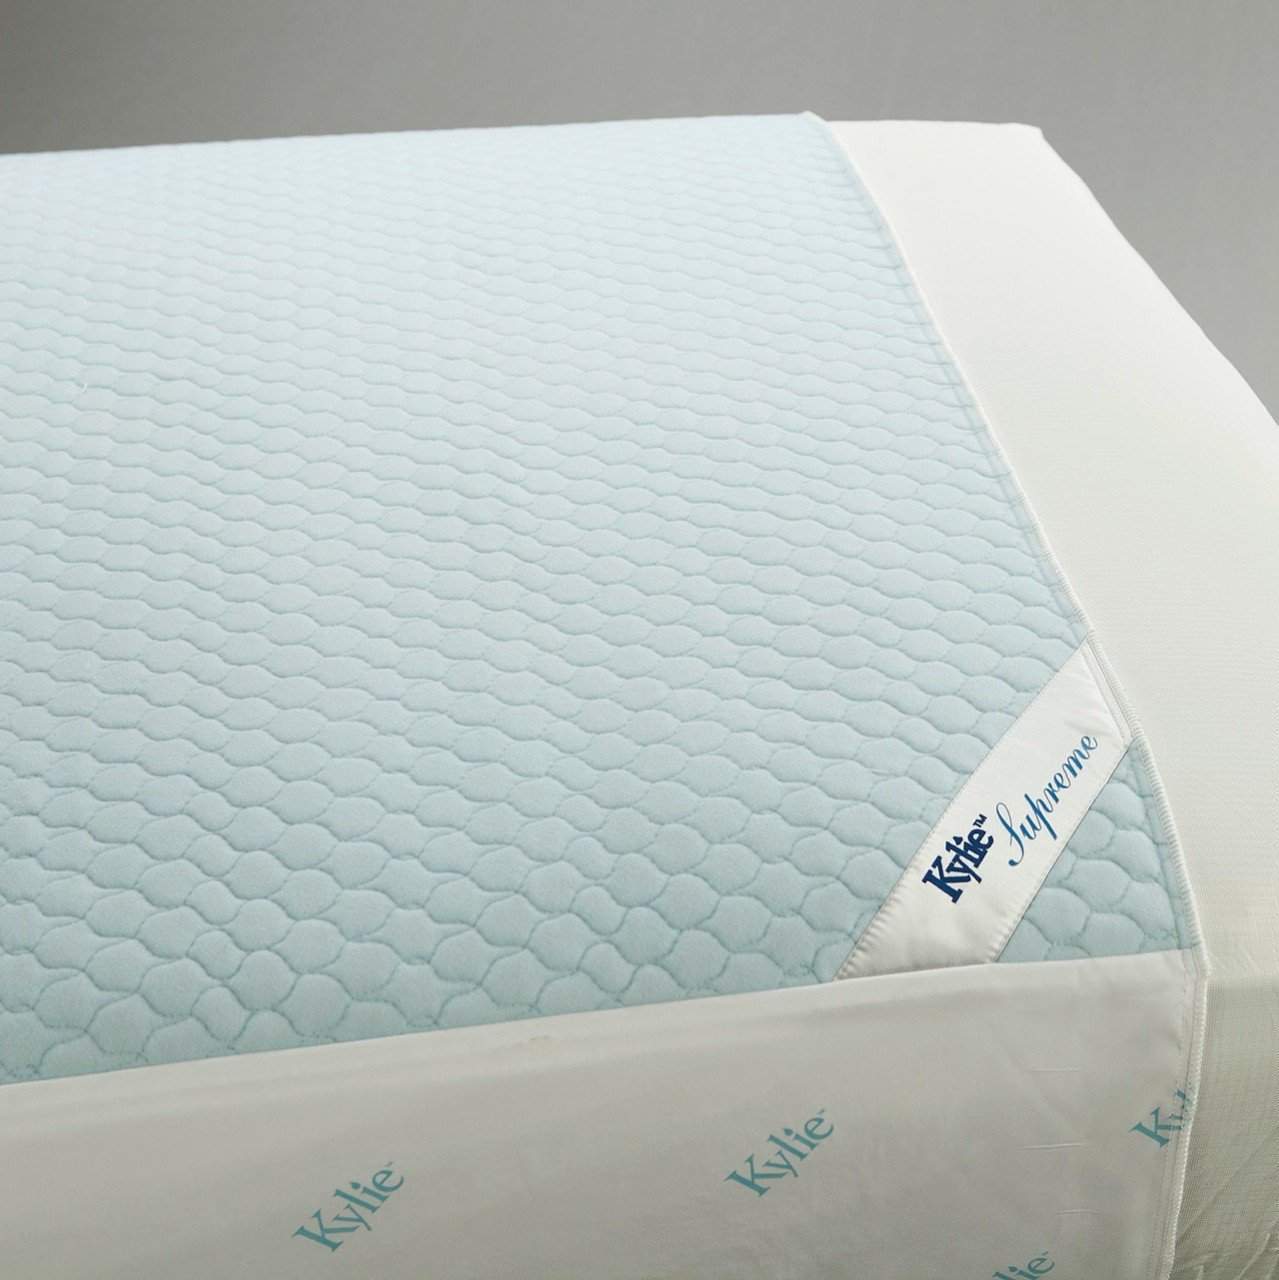 Kylie Bed Supreme Protector Sheet K125290 by Kylie